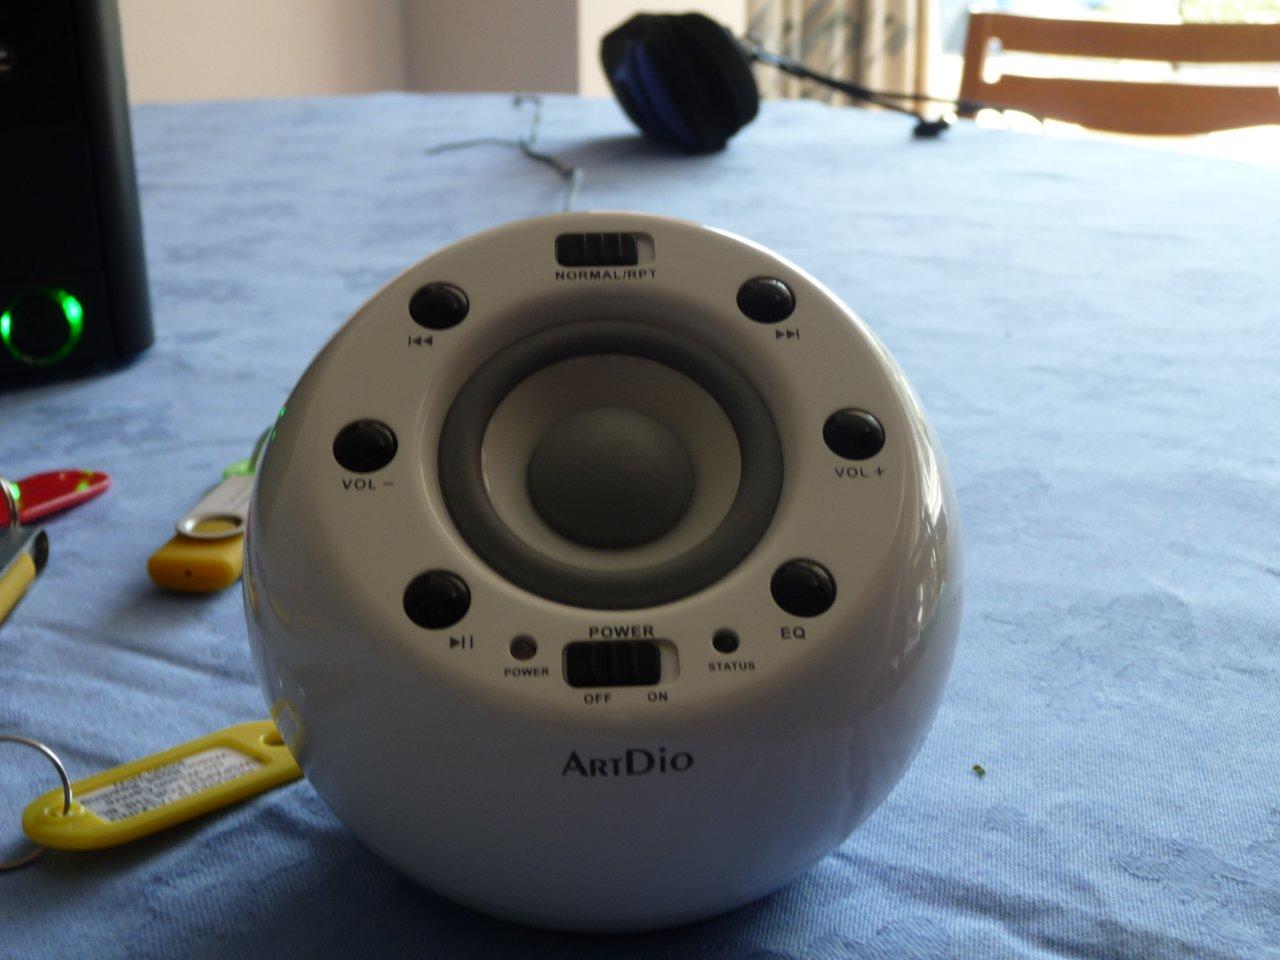 Picture of the artdio USB player